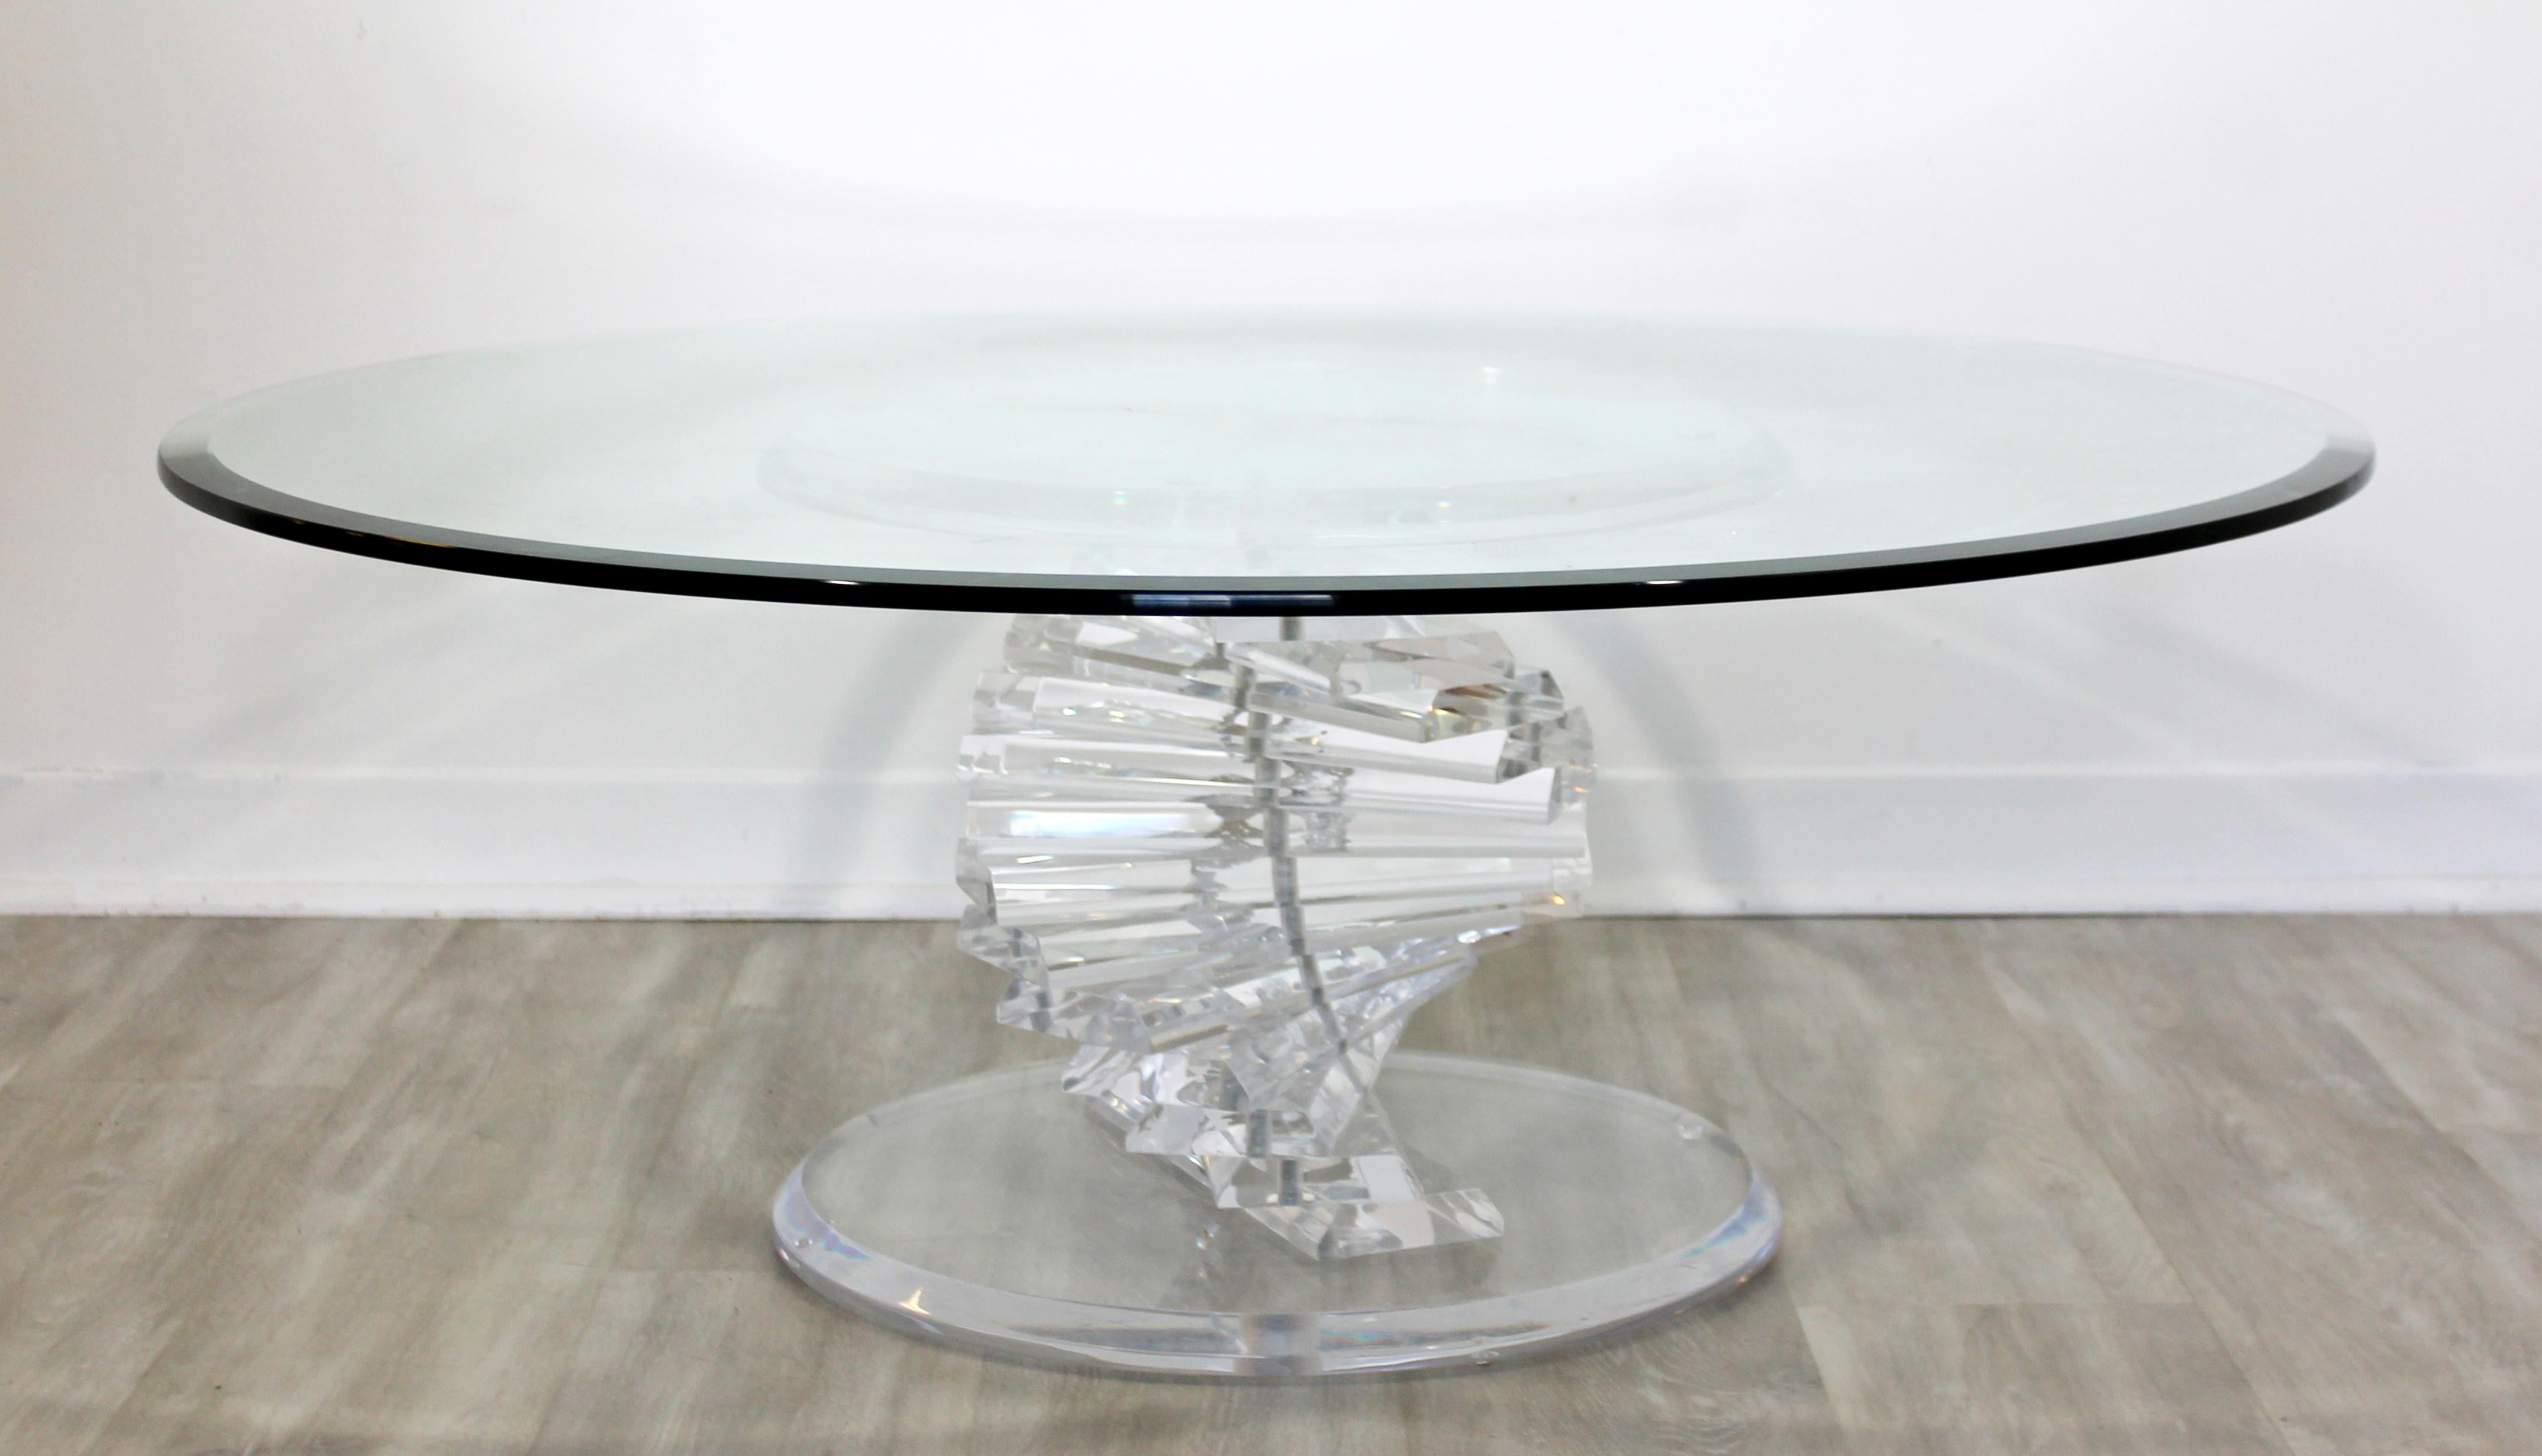 For your consideration is a simply stunning, round glass topped coffee table, on a spiral helix Lucite base, circa 1970s. In excellent vintage condition. The dimensions are 42